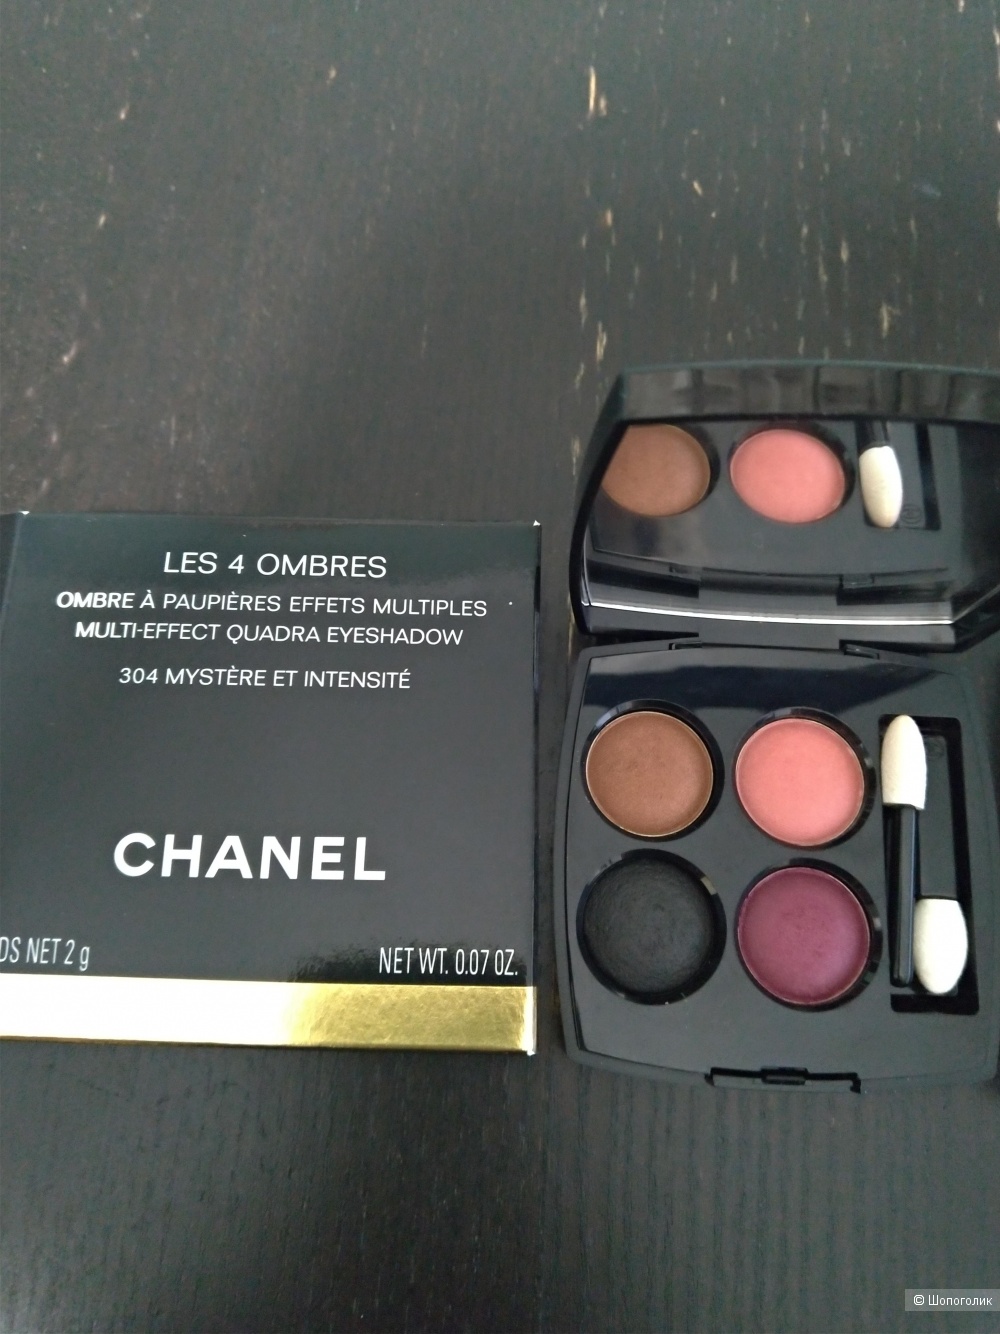 Chanel Les 4 ombres 304 Mystery et intensite.